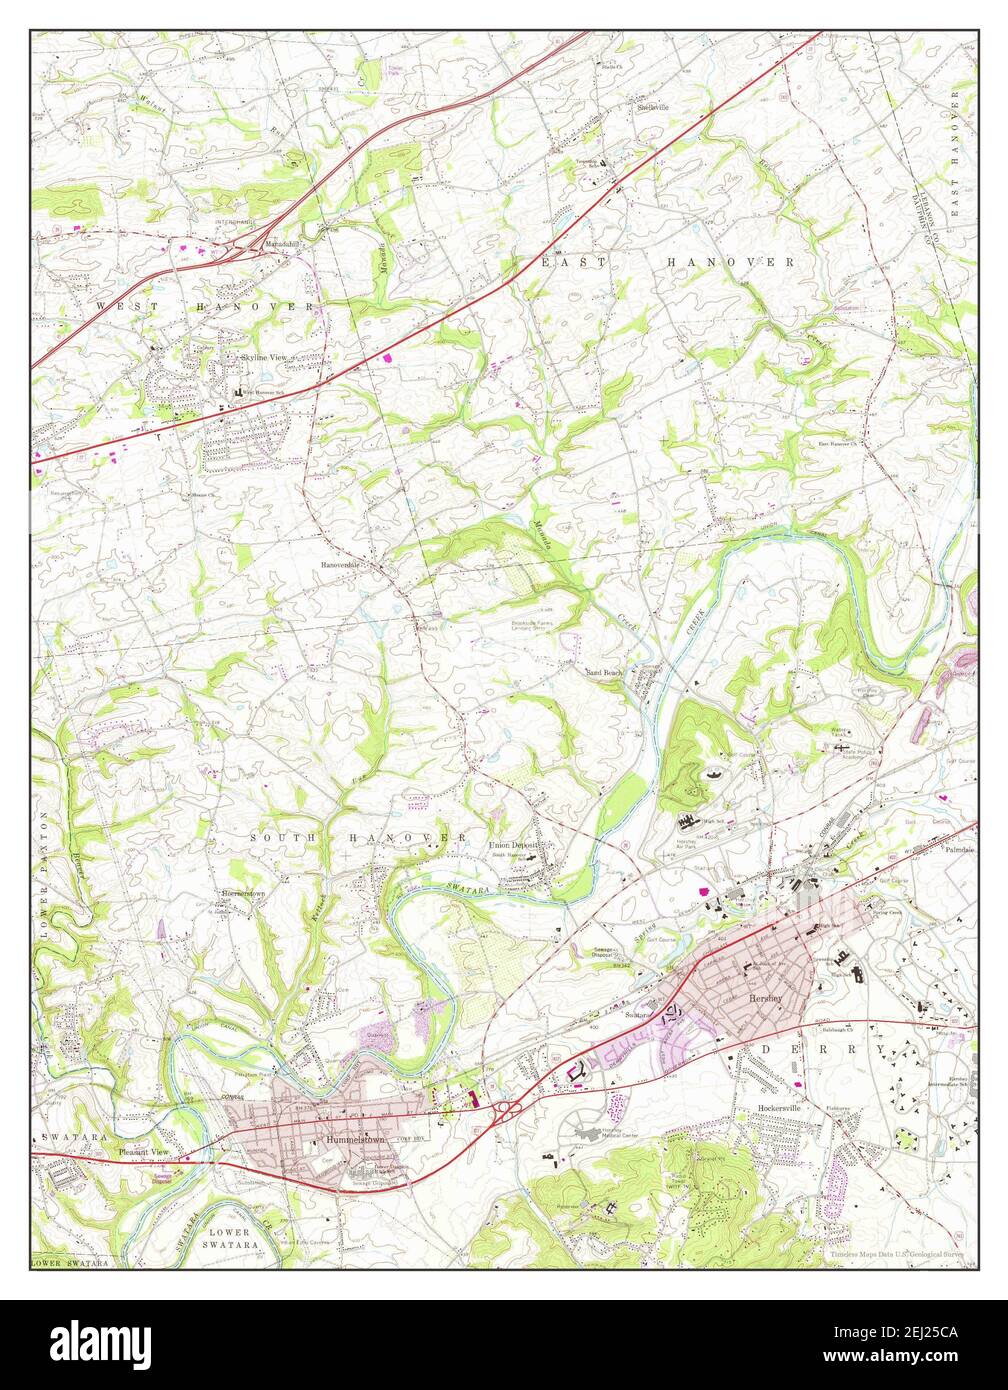 Hershey, Pennsylvania, map 1969, 1:24000, United States of America by ...